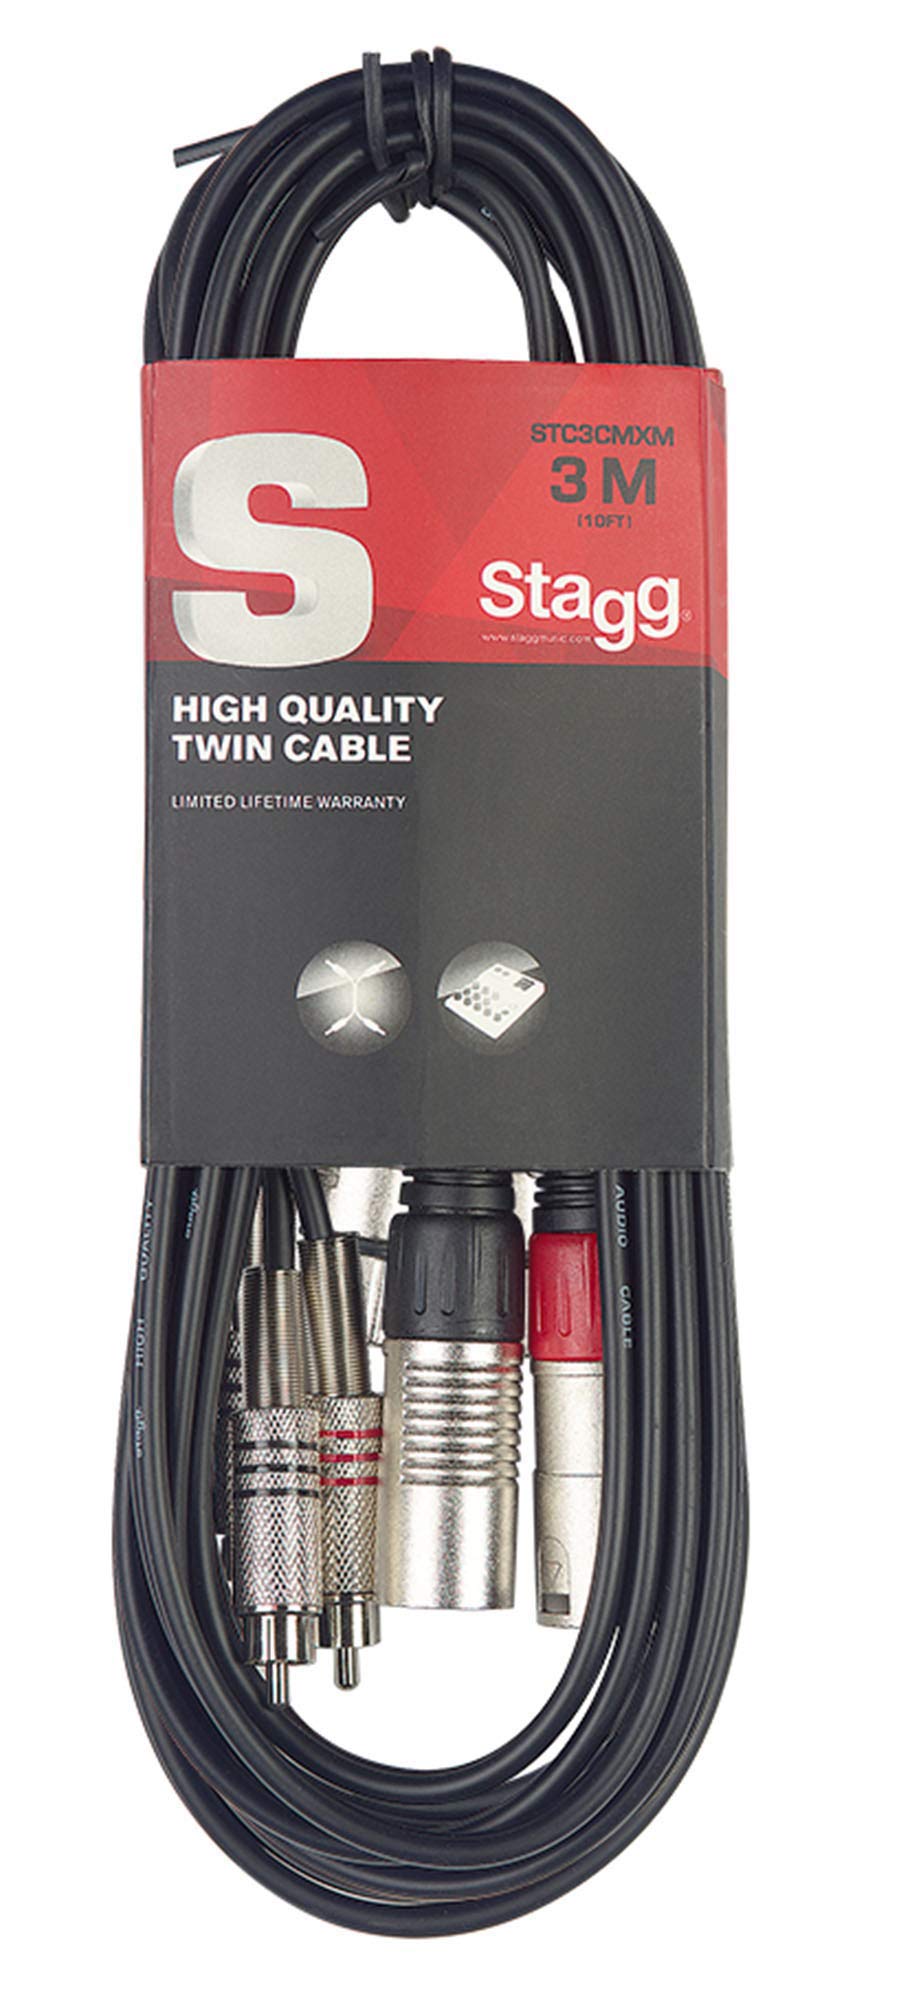  [AUSTRALIA] - Stagg STC3CMXM Male XLR to Male RCA Twin Cable - 10ft. 3m Twin RCAm to XLRm